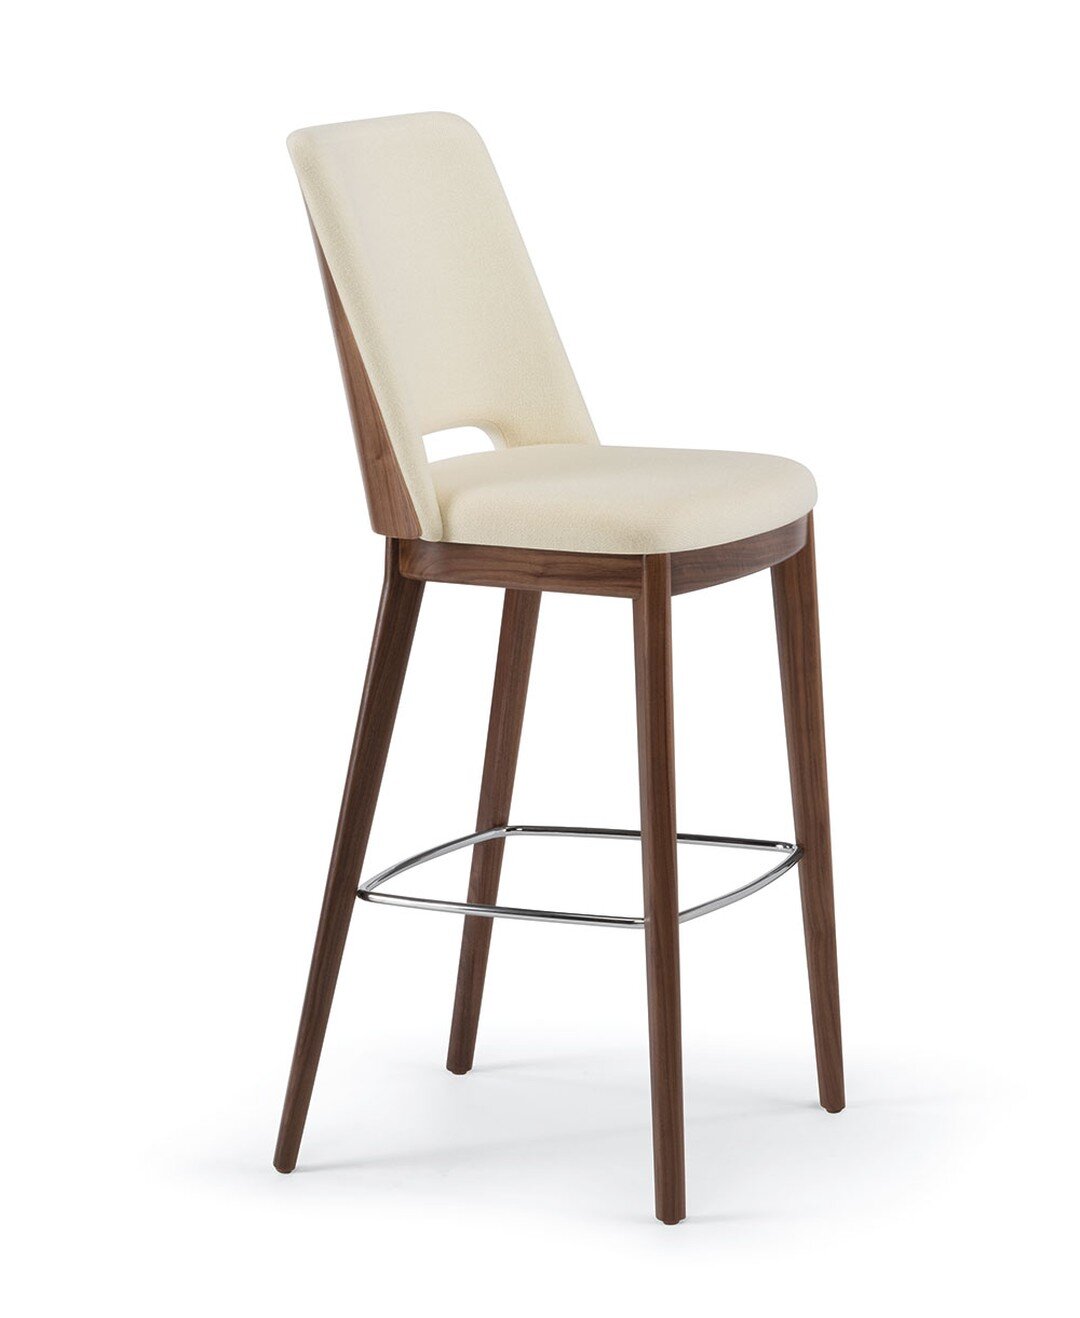 ‼️ New Product Alert ‼️

Theme is all new from Arcadia ! Comprised of wood-leg guest chairs as well as counter and bar-height stools, all models are available fully upholstered or with a wood back shell and feature a prominent cutout on the lower are